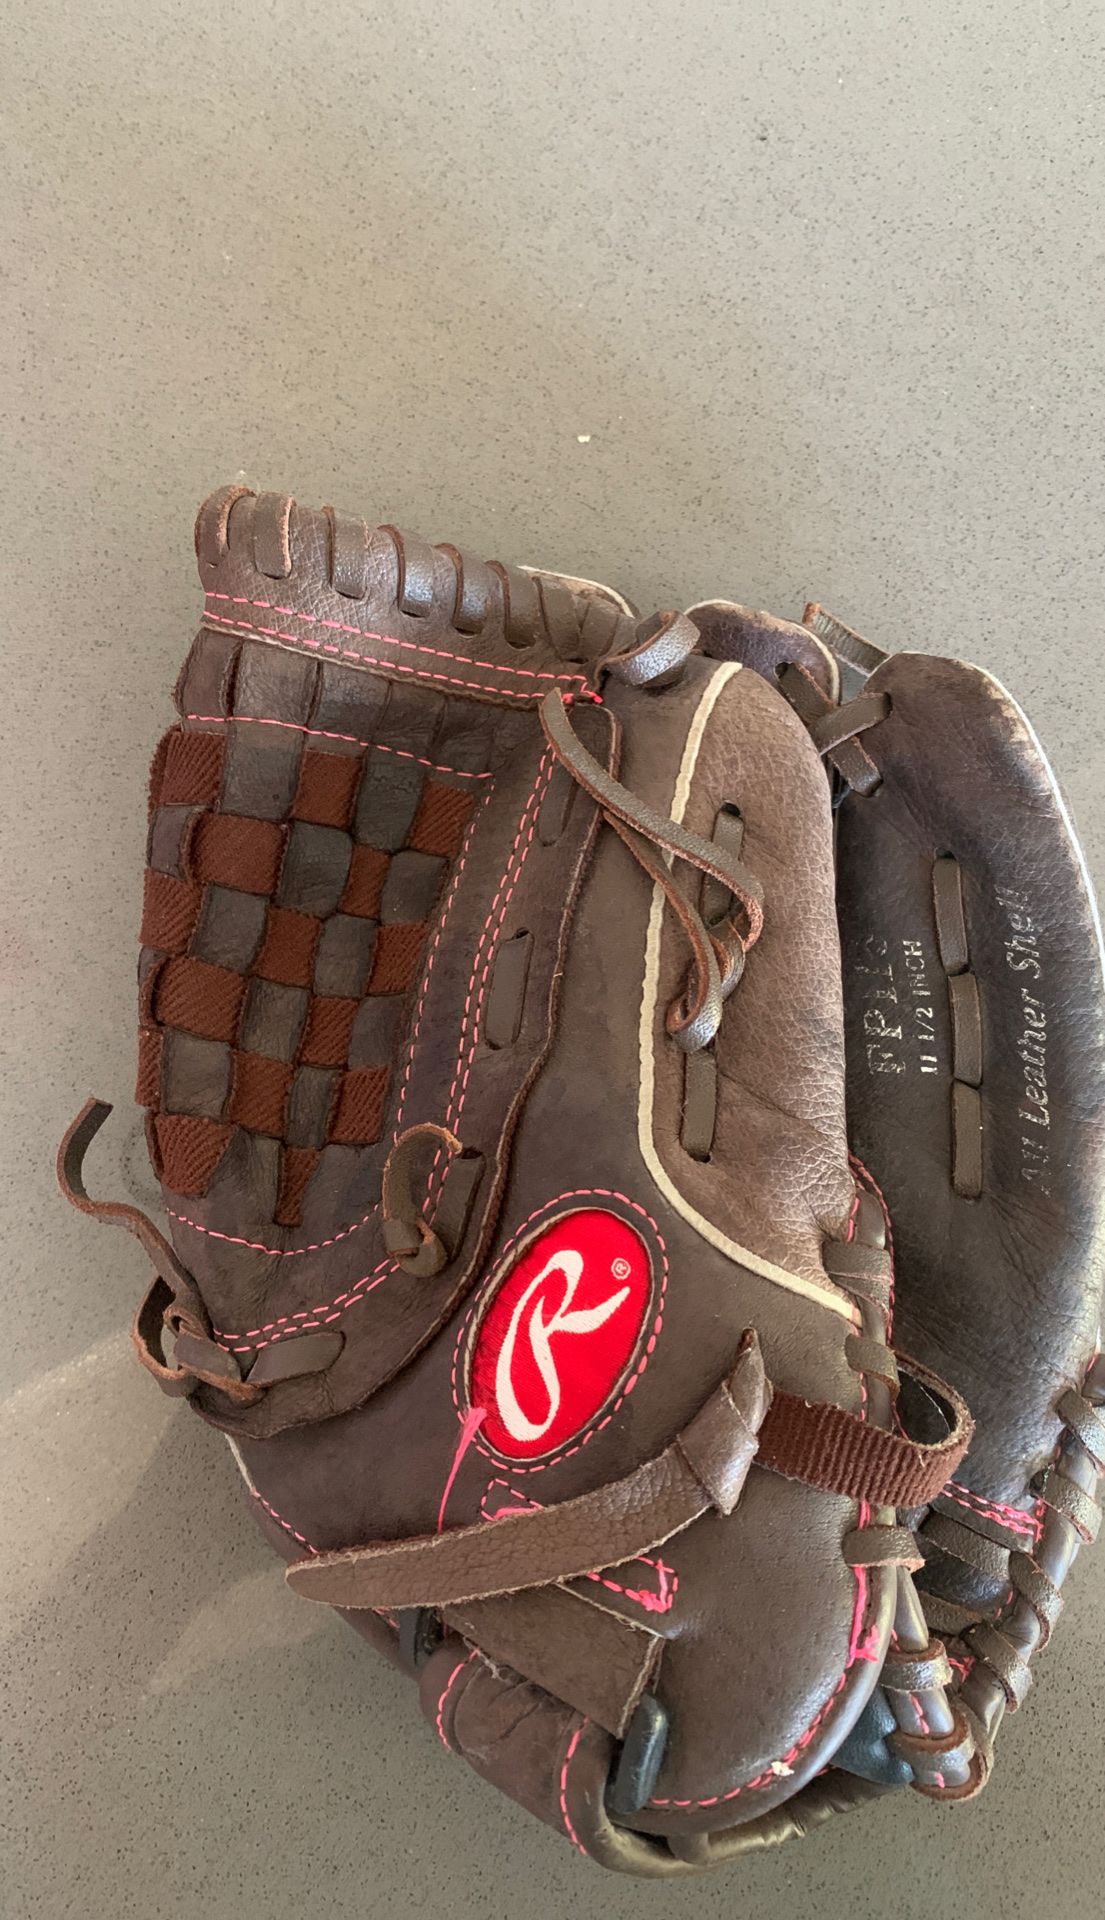 Used 11.5” Fastpitch Glove